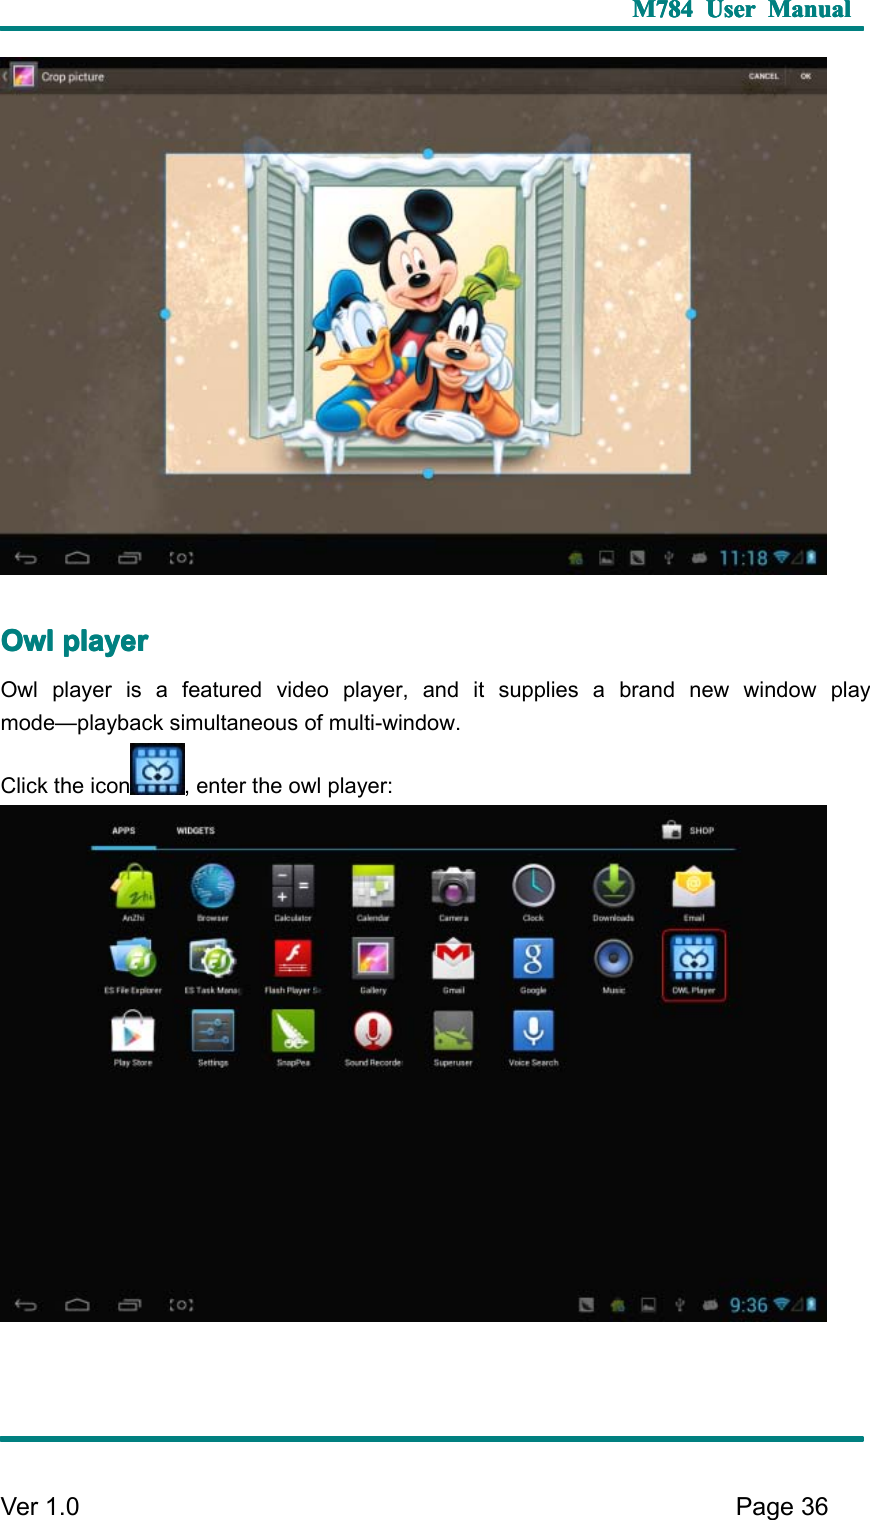 M784M784M784M784 UserUserUserUser ManualManualManualManualVer 1 .0 Page36OwlOwlOwlOwl playerplayerplayerplayerOwl player is a featured video player, and it supplies a brand new window playmode — playback simultaneous of multi-window.C lick the icon , enter the owl player: